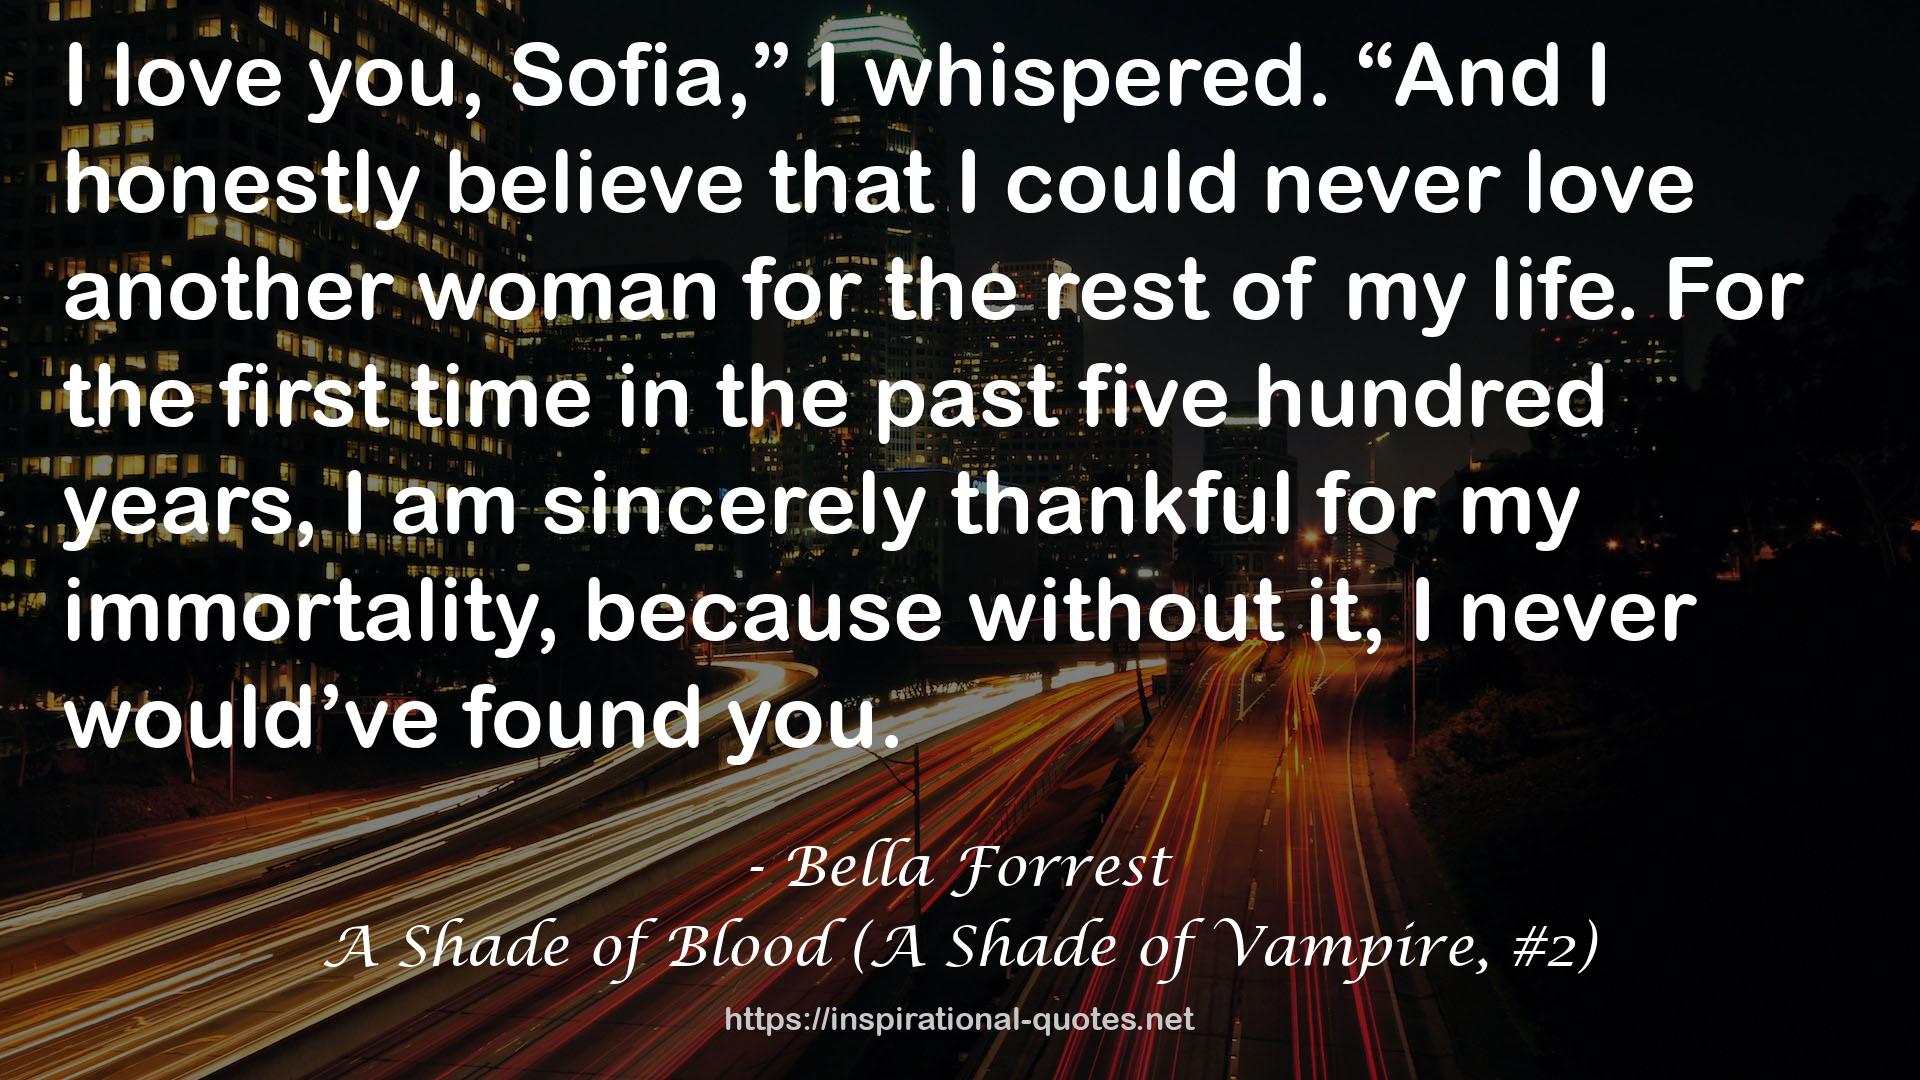 A Shade of Blood (A Shade of Vampire, #2) QUOTES